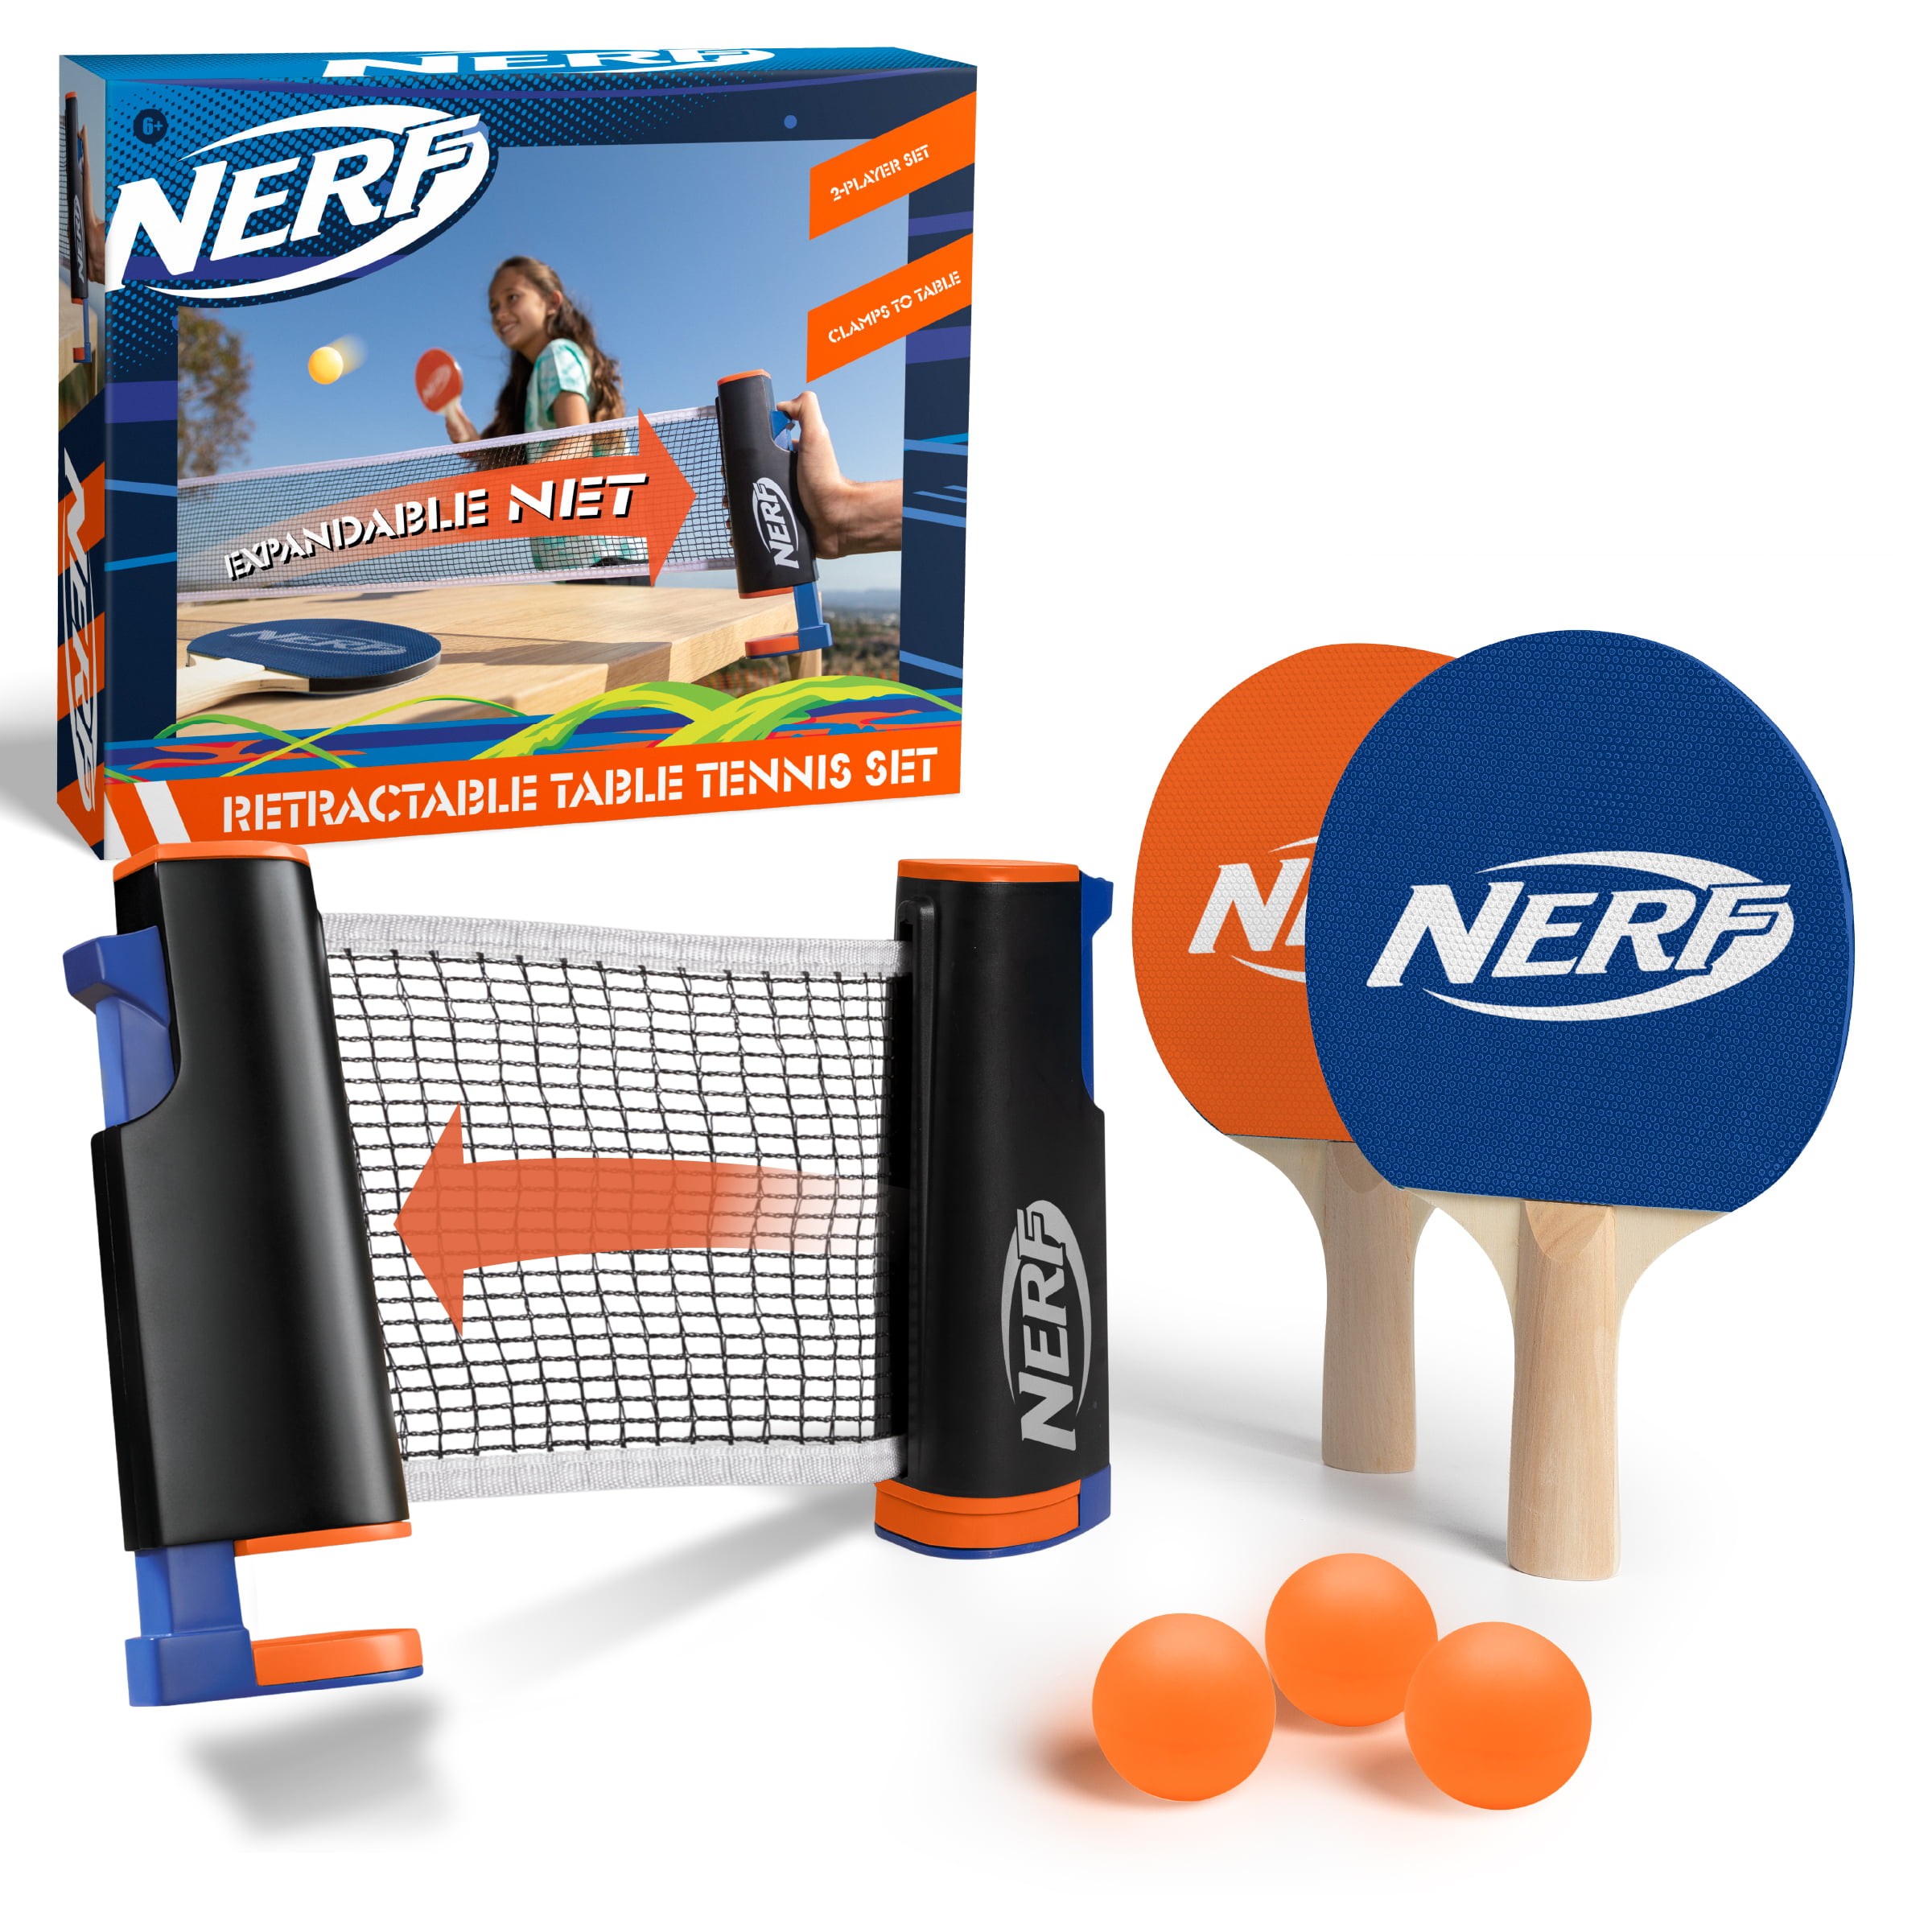 Play Almost Anywhere with Expandable Net, Retractable Tabletop Tennis Game Set 